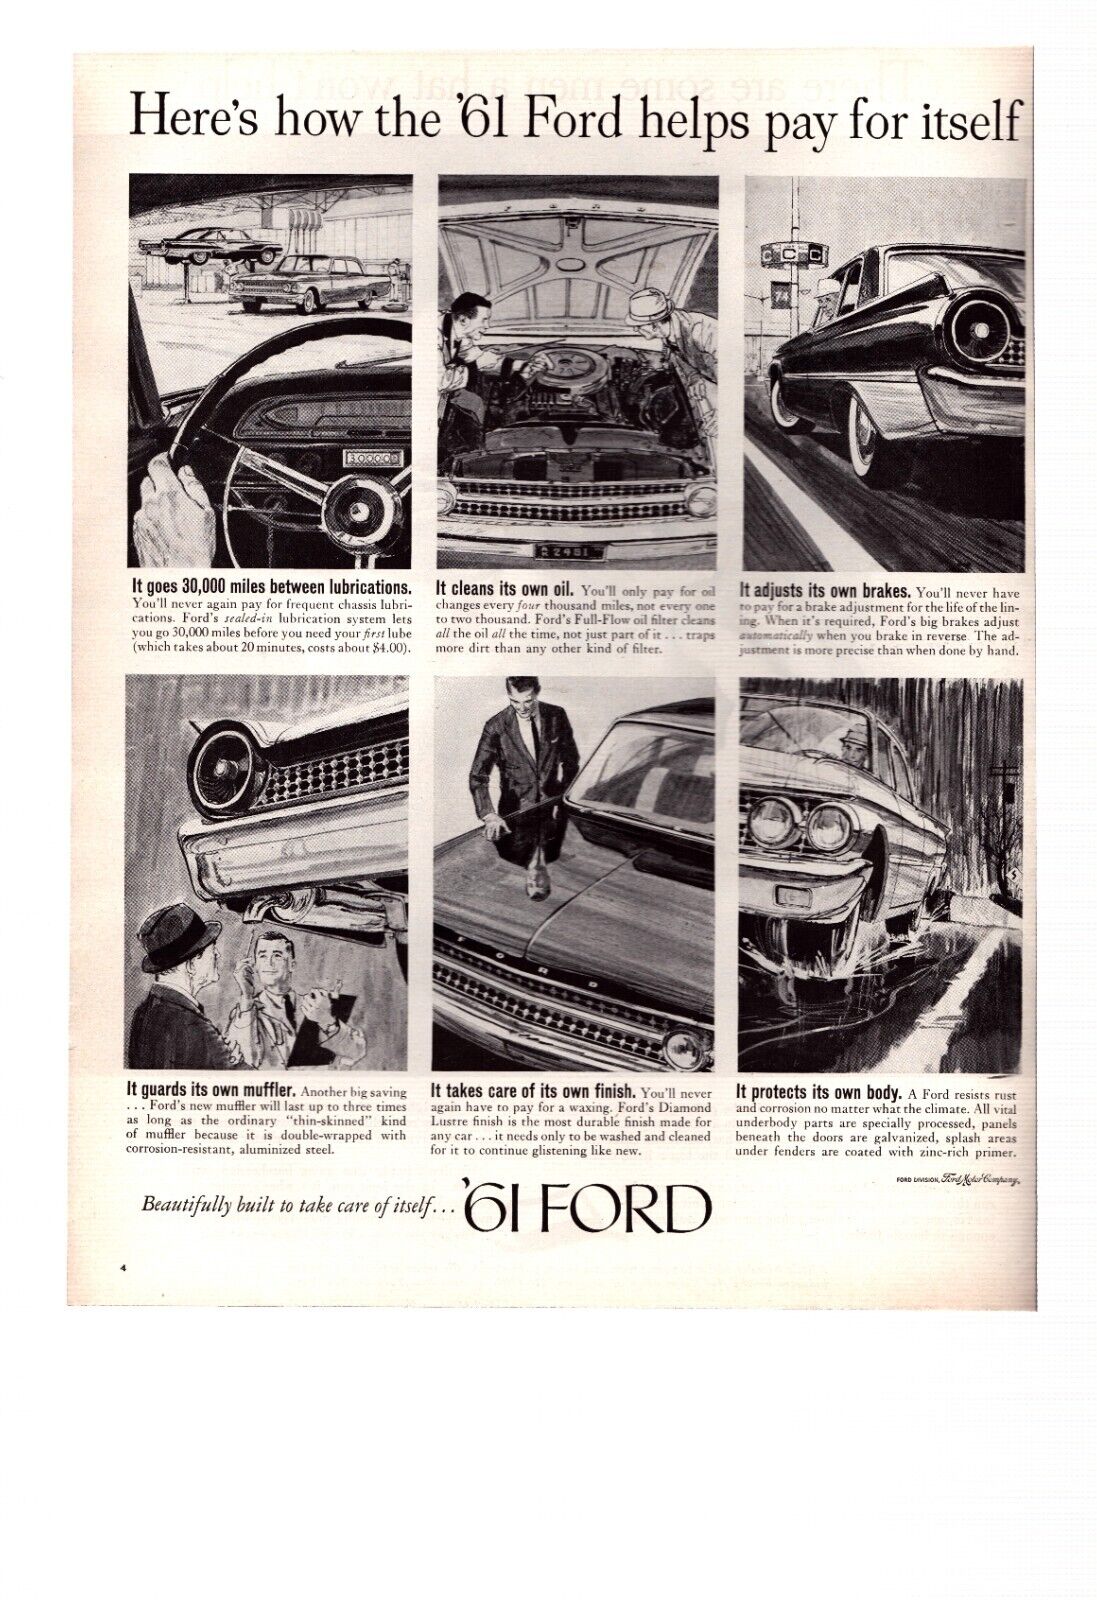 Vintage Print Ad 1961 Ford Motor Company Helps Pay for Itself